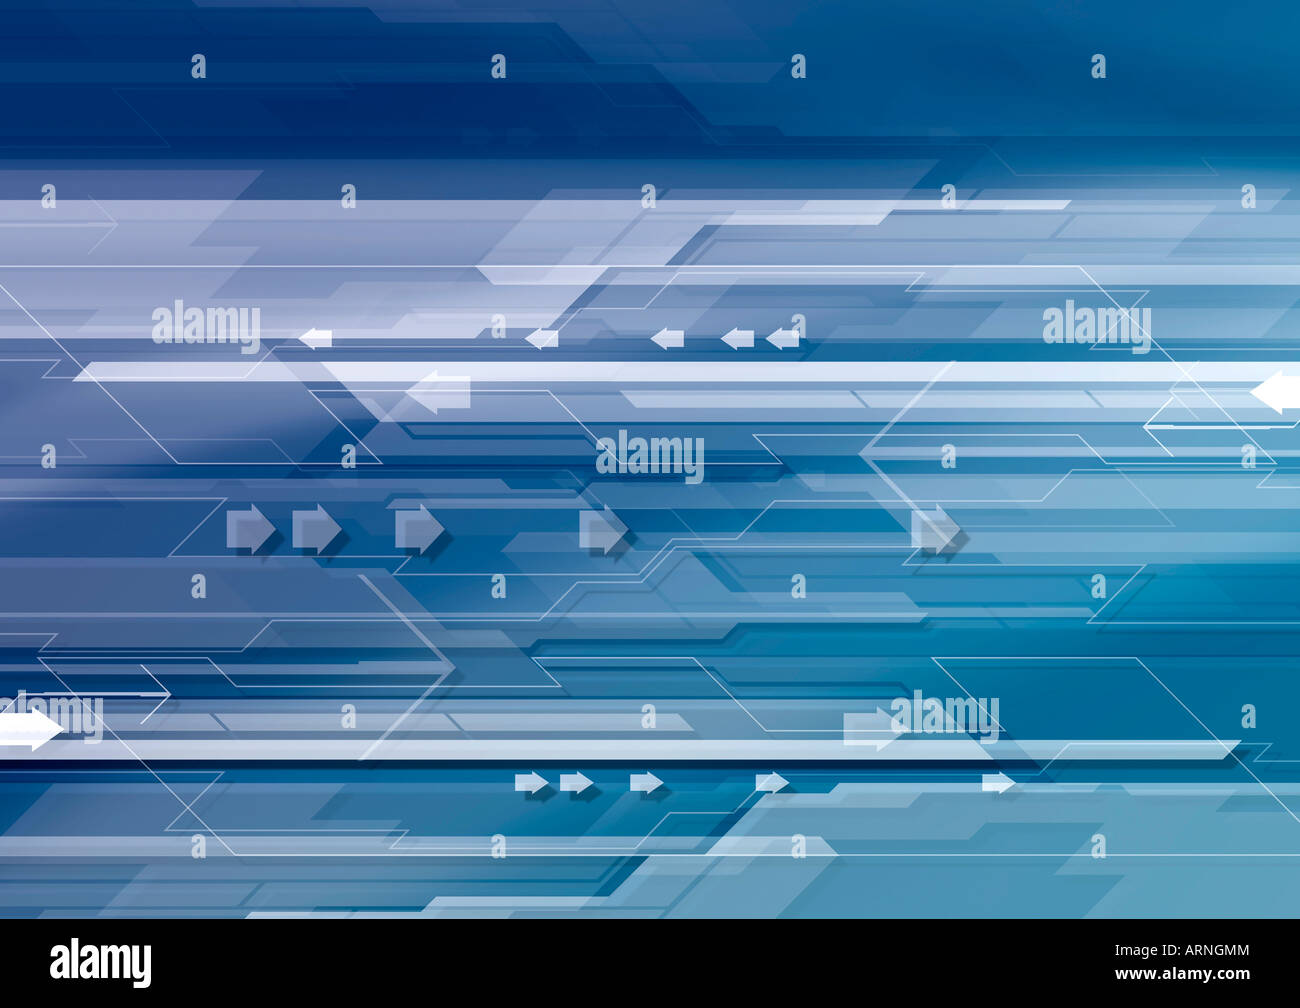 Computer background illustration with gradient Stock Photo